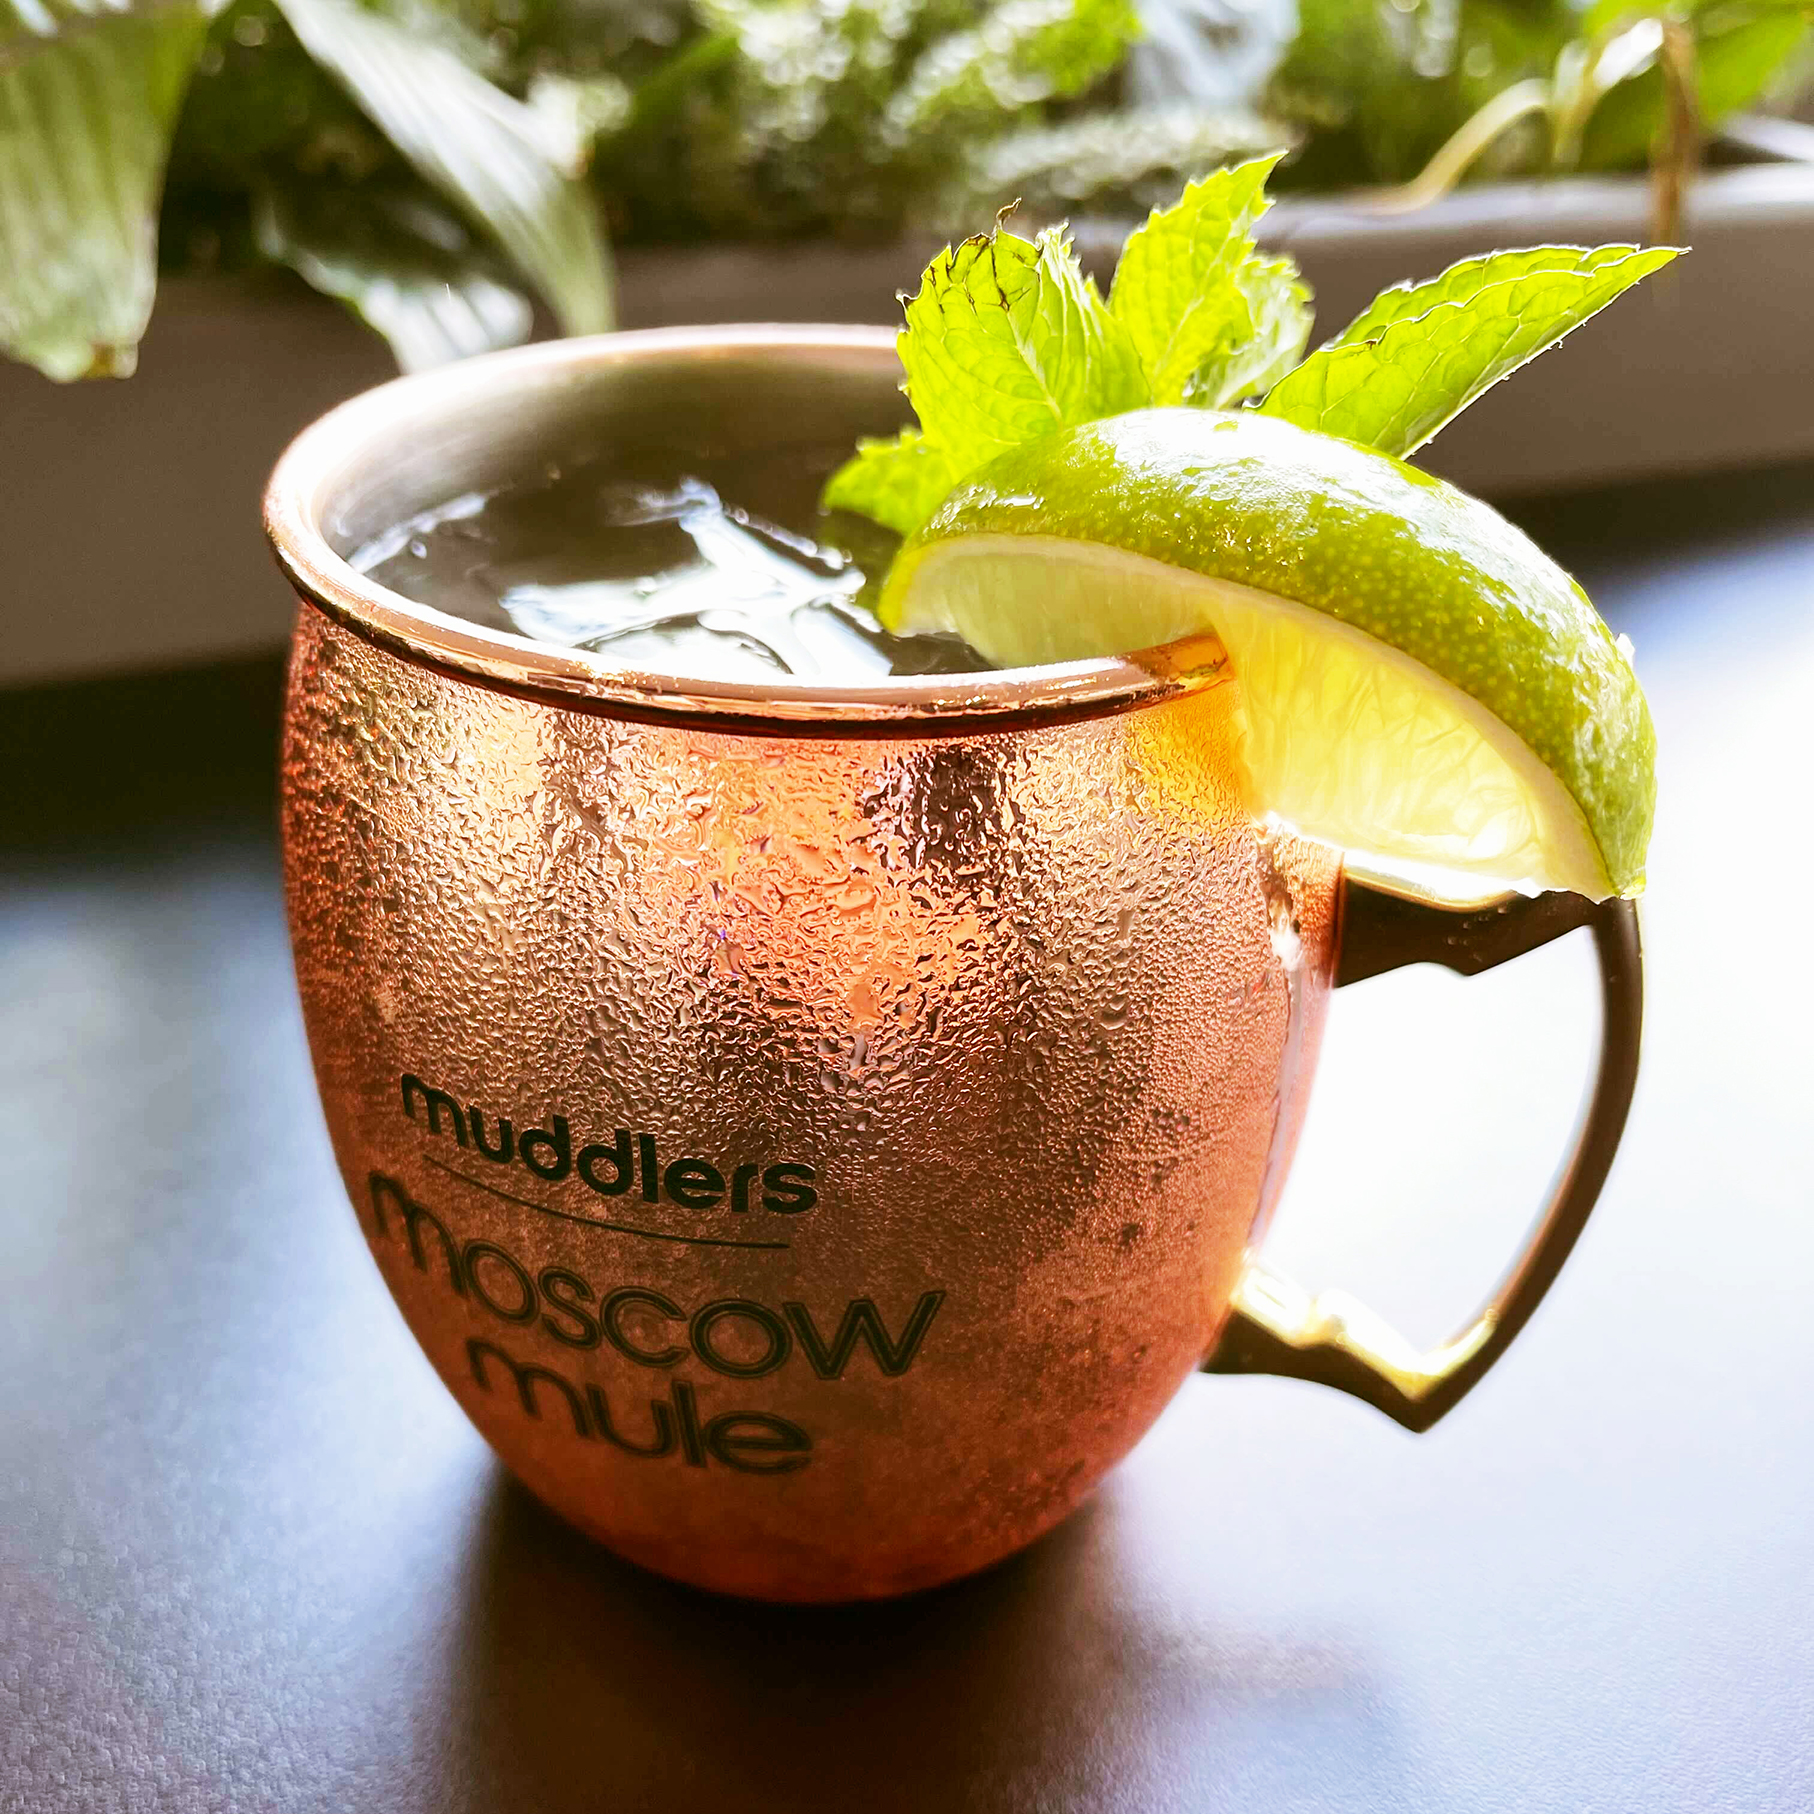 P49 Muddlers: Moscow Mule